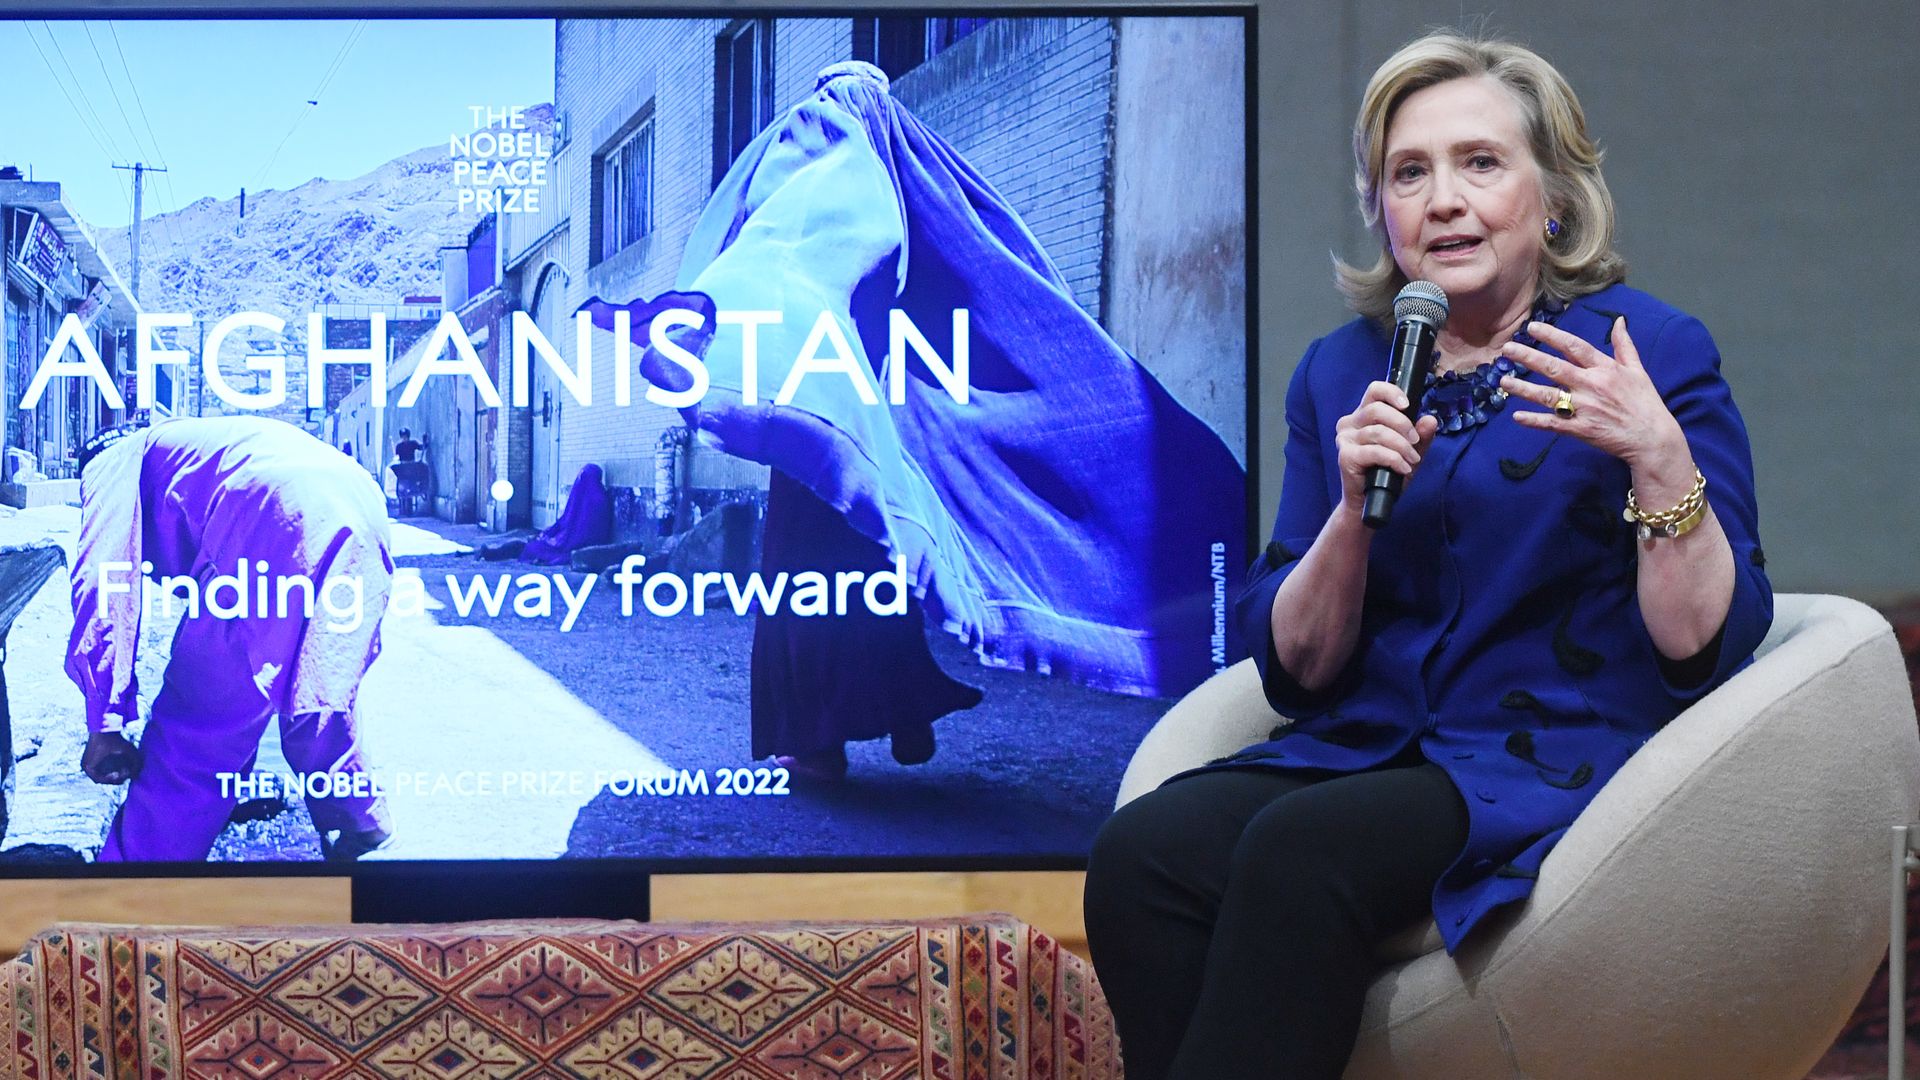 Photo of Hillary Clinton speaking while sitting on stage